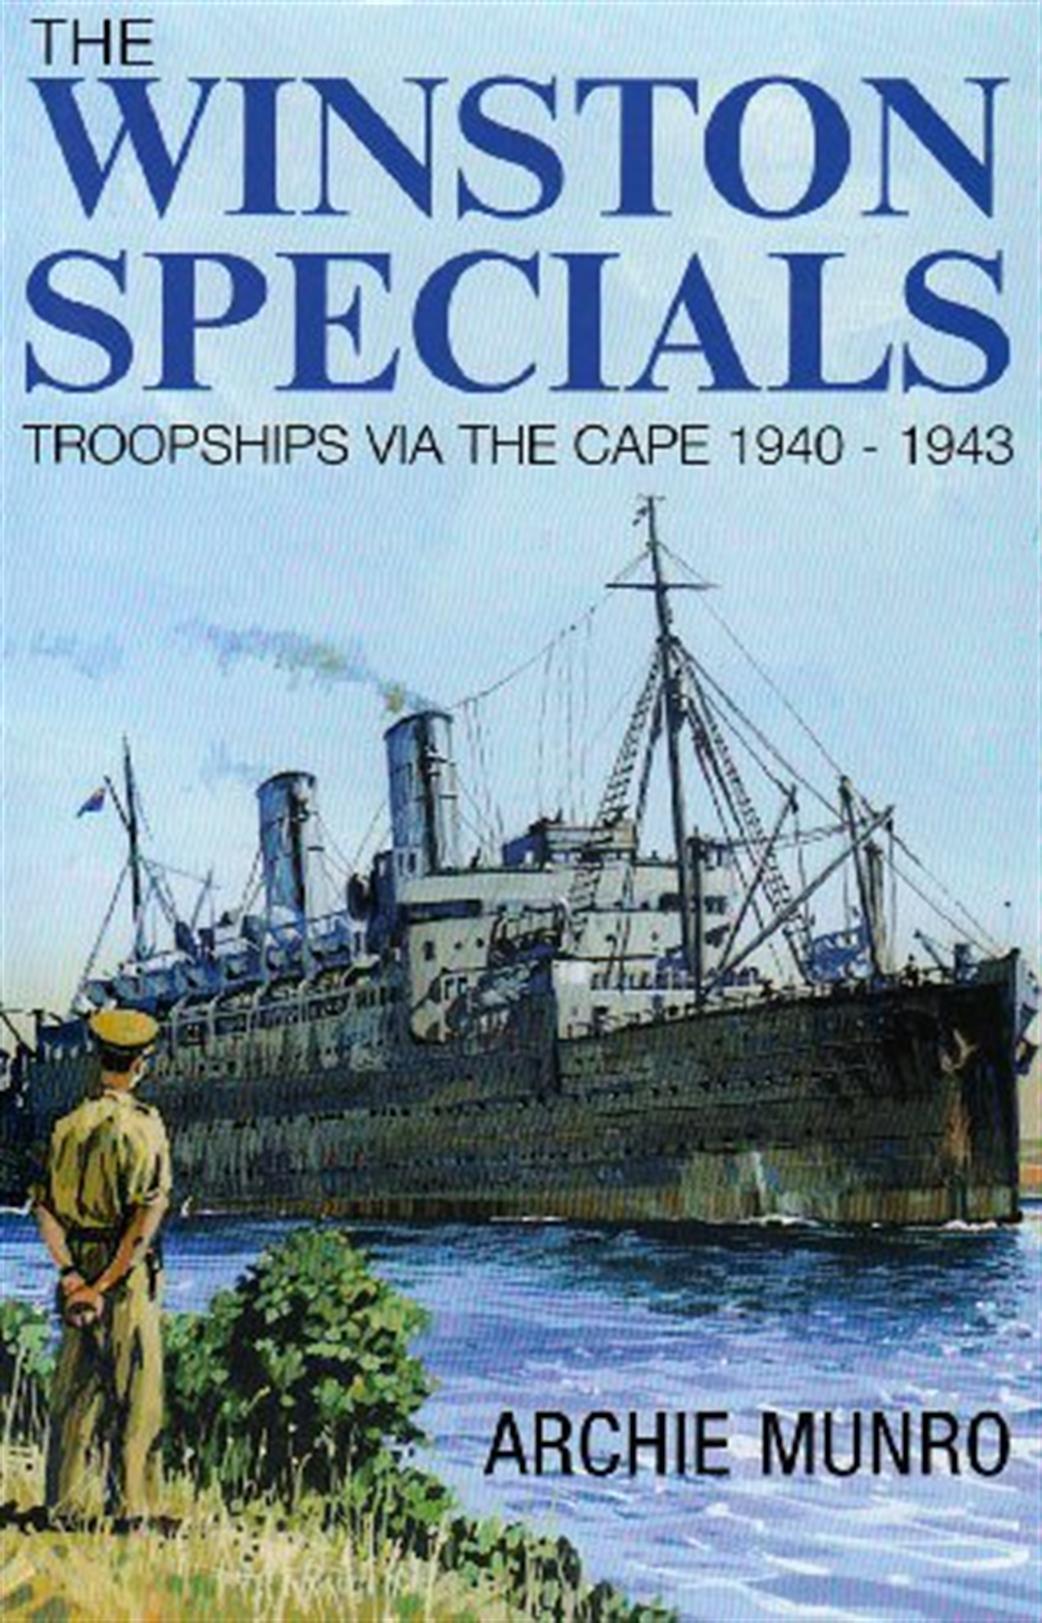 190445920X The Winston Specials By Archie Munro